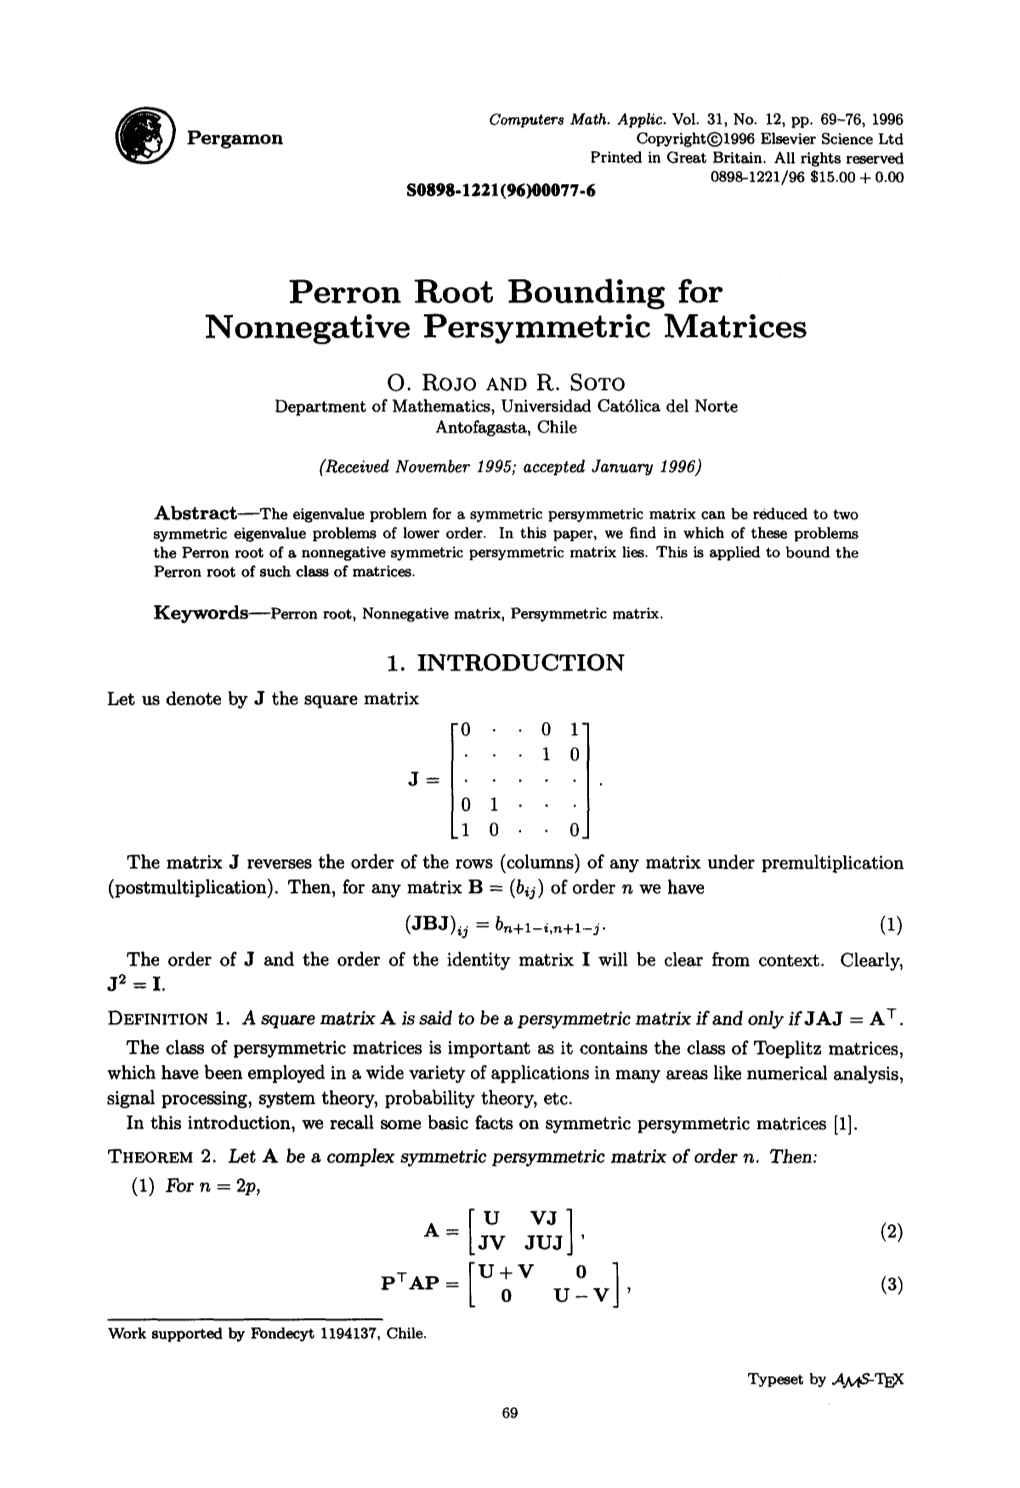 Perron Root Bounding for Nonnegative Persymmetric Matrices